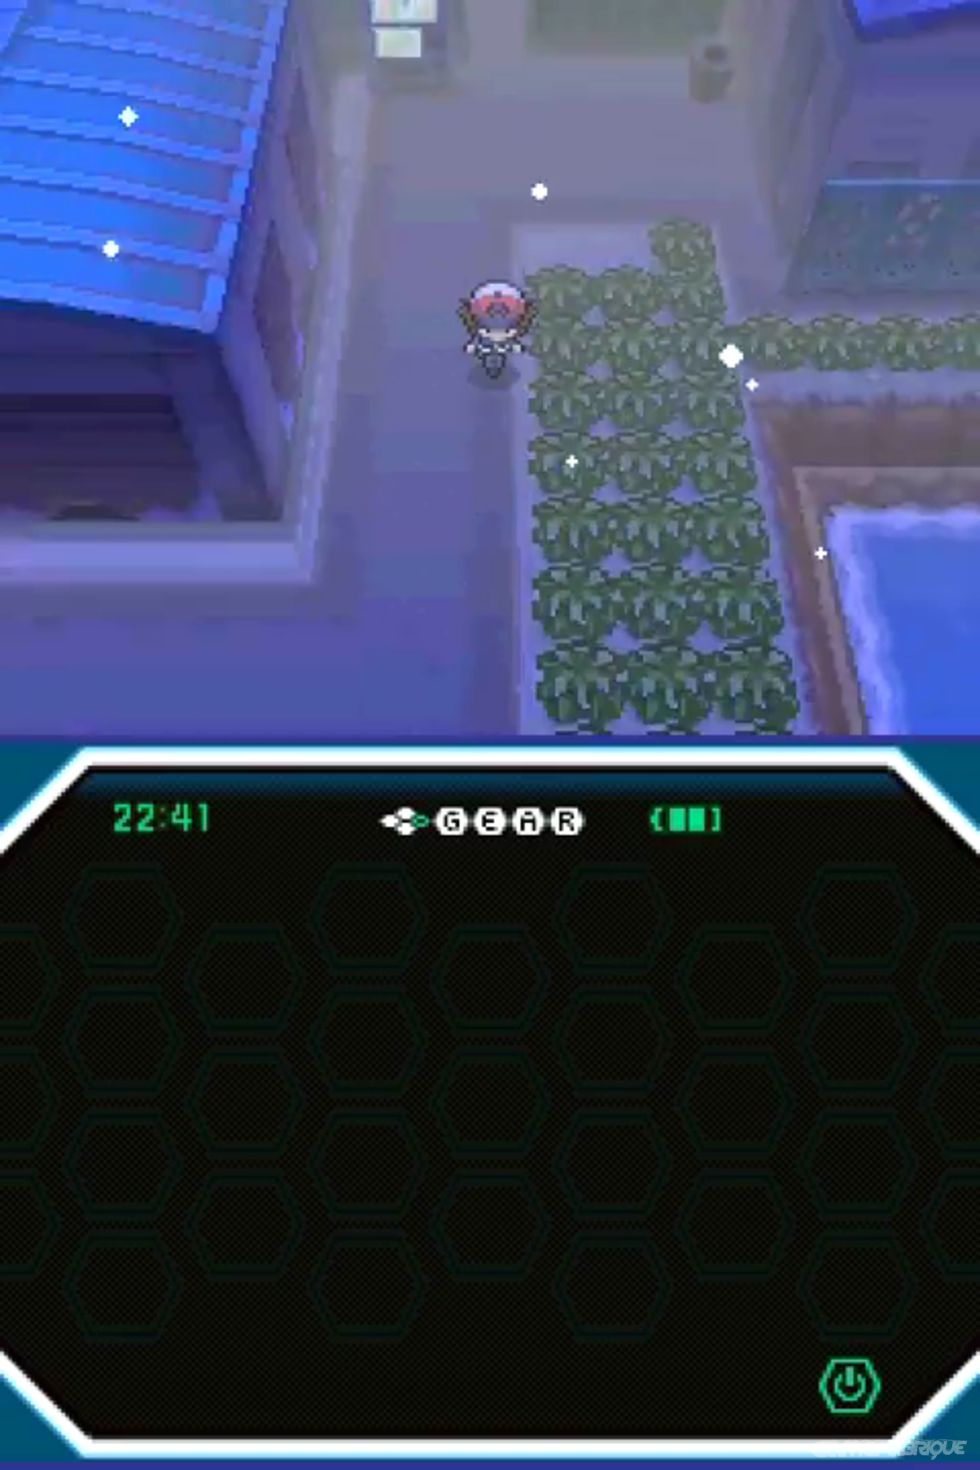 Pokemon Black Version - ds - Walkthrough and Guide - Page 685 - GameSpy